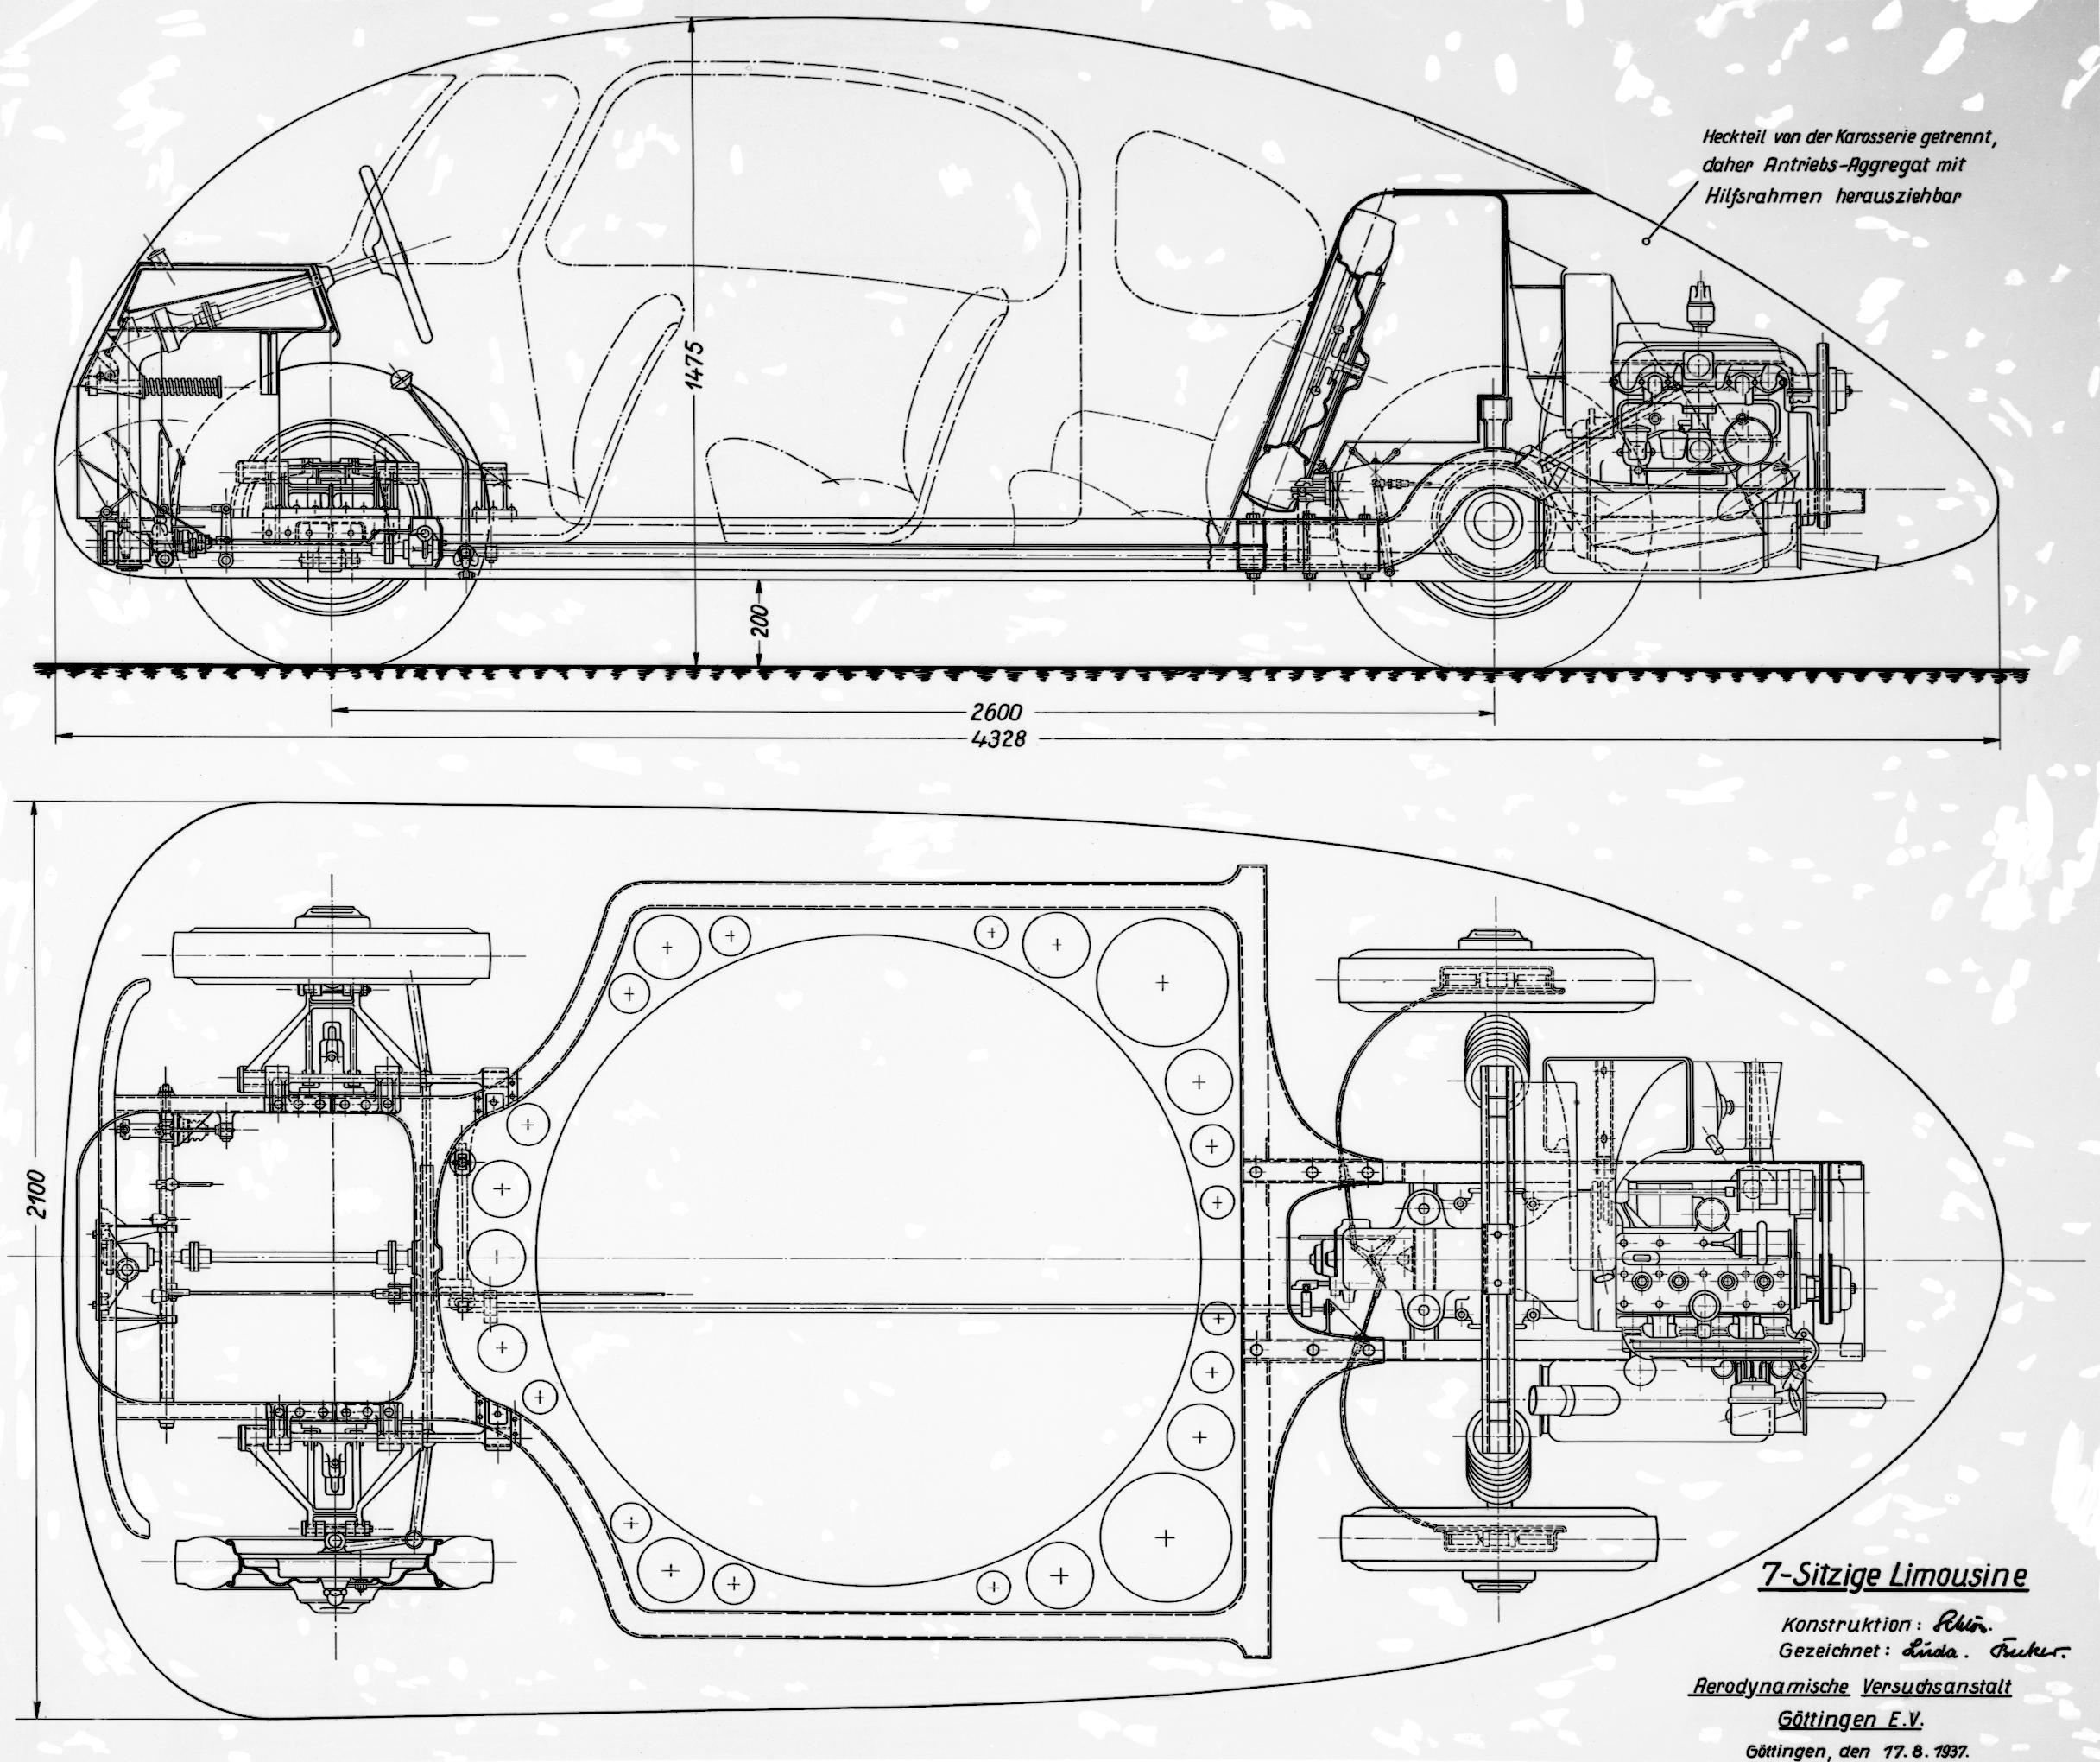 The layout of the Schlörwagen reflects the prevalent German developmental thinking of the thirties, backbone or platform frame chassis, rear mounted engine.